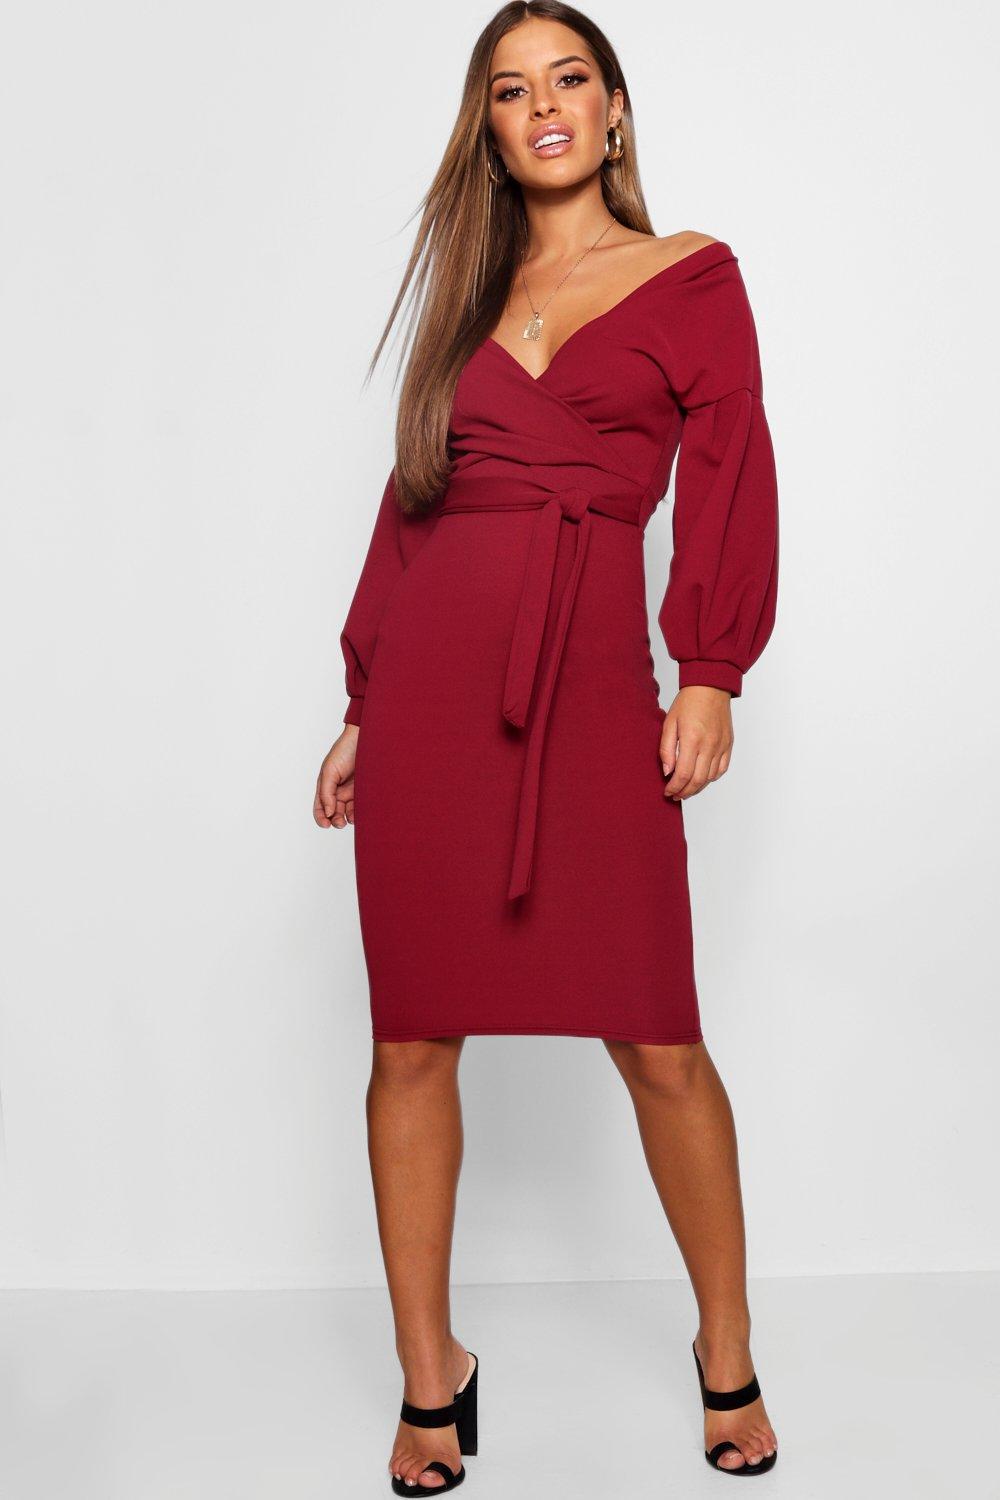 Lyst - Boohoo Petite Off The Shoulder Wrap Midi Dress in Red